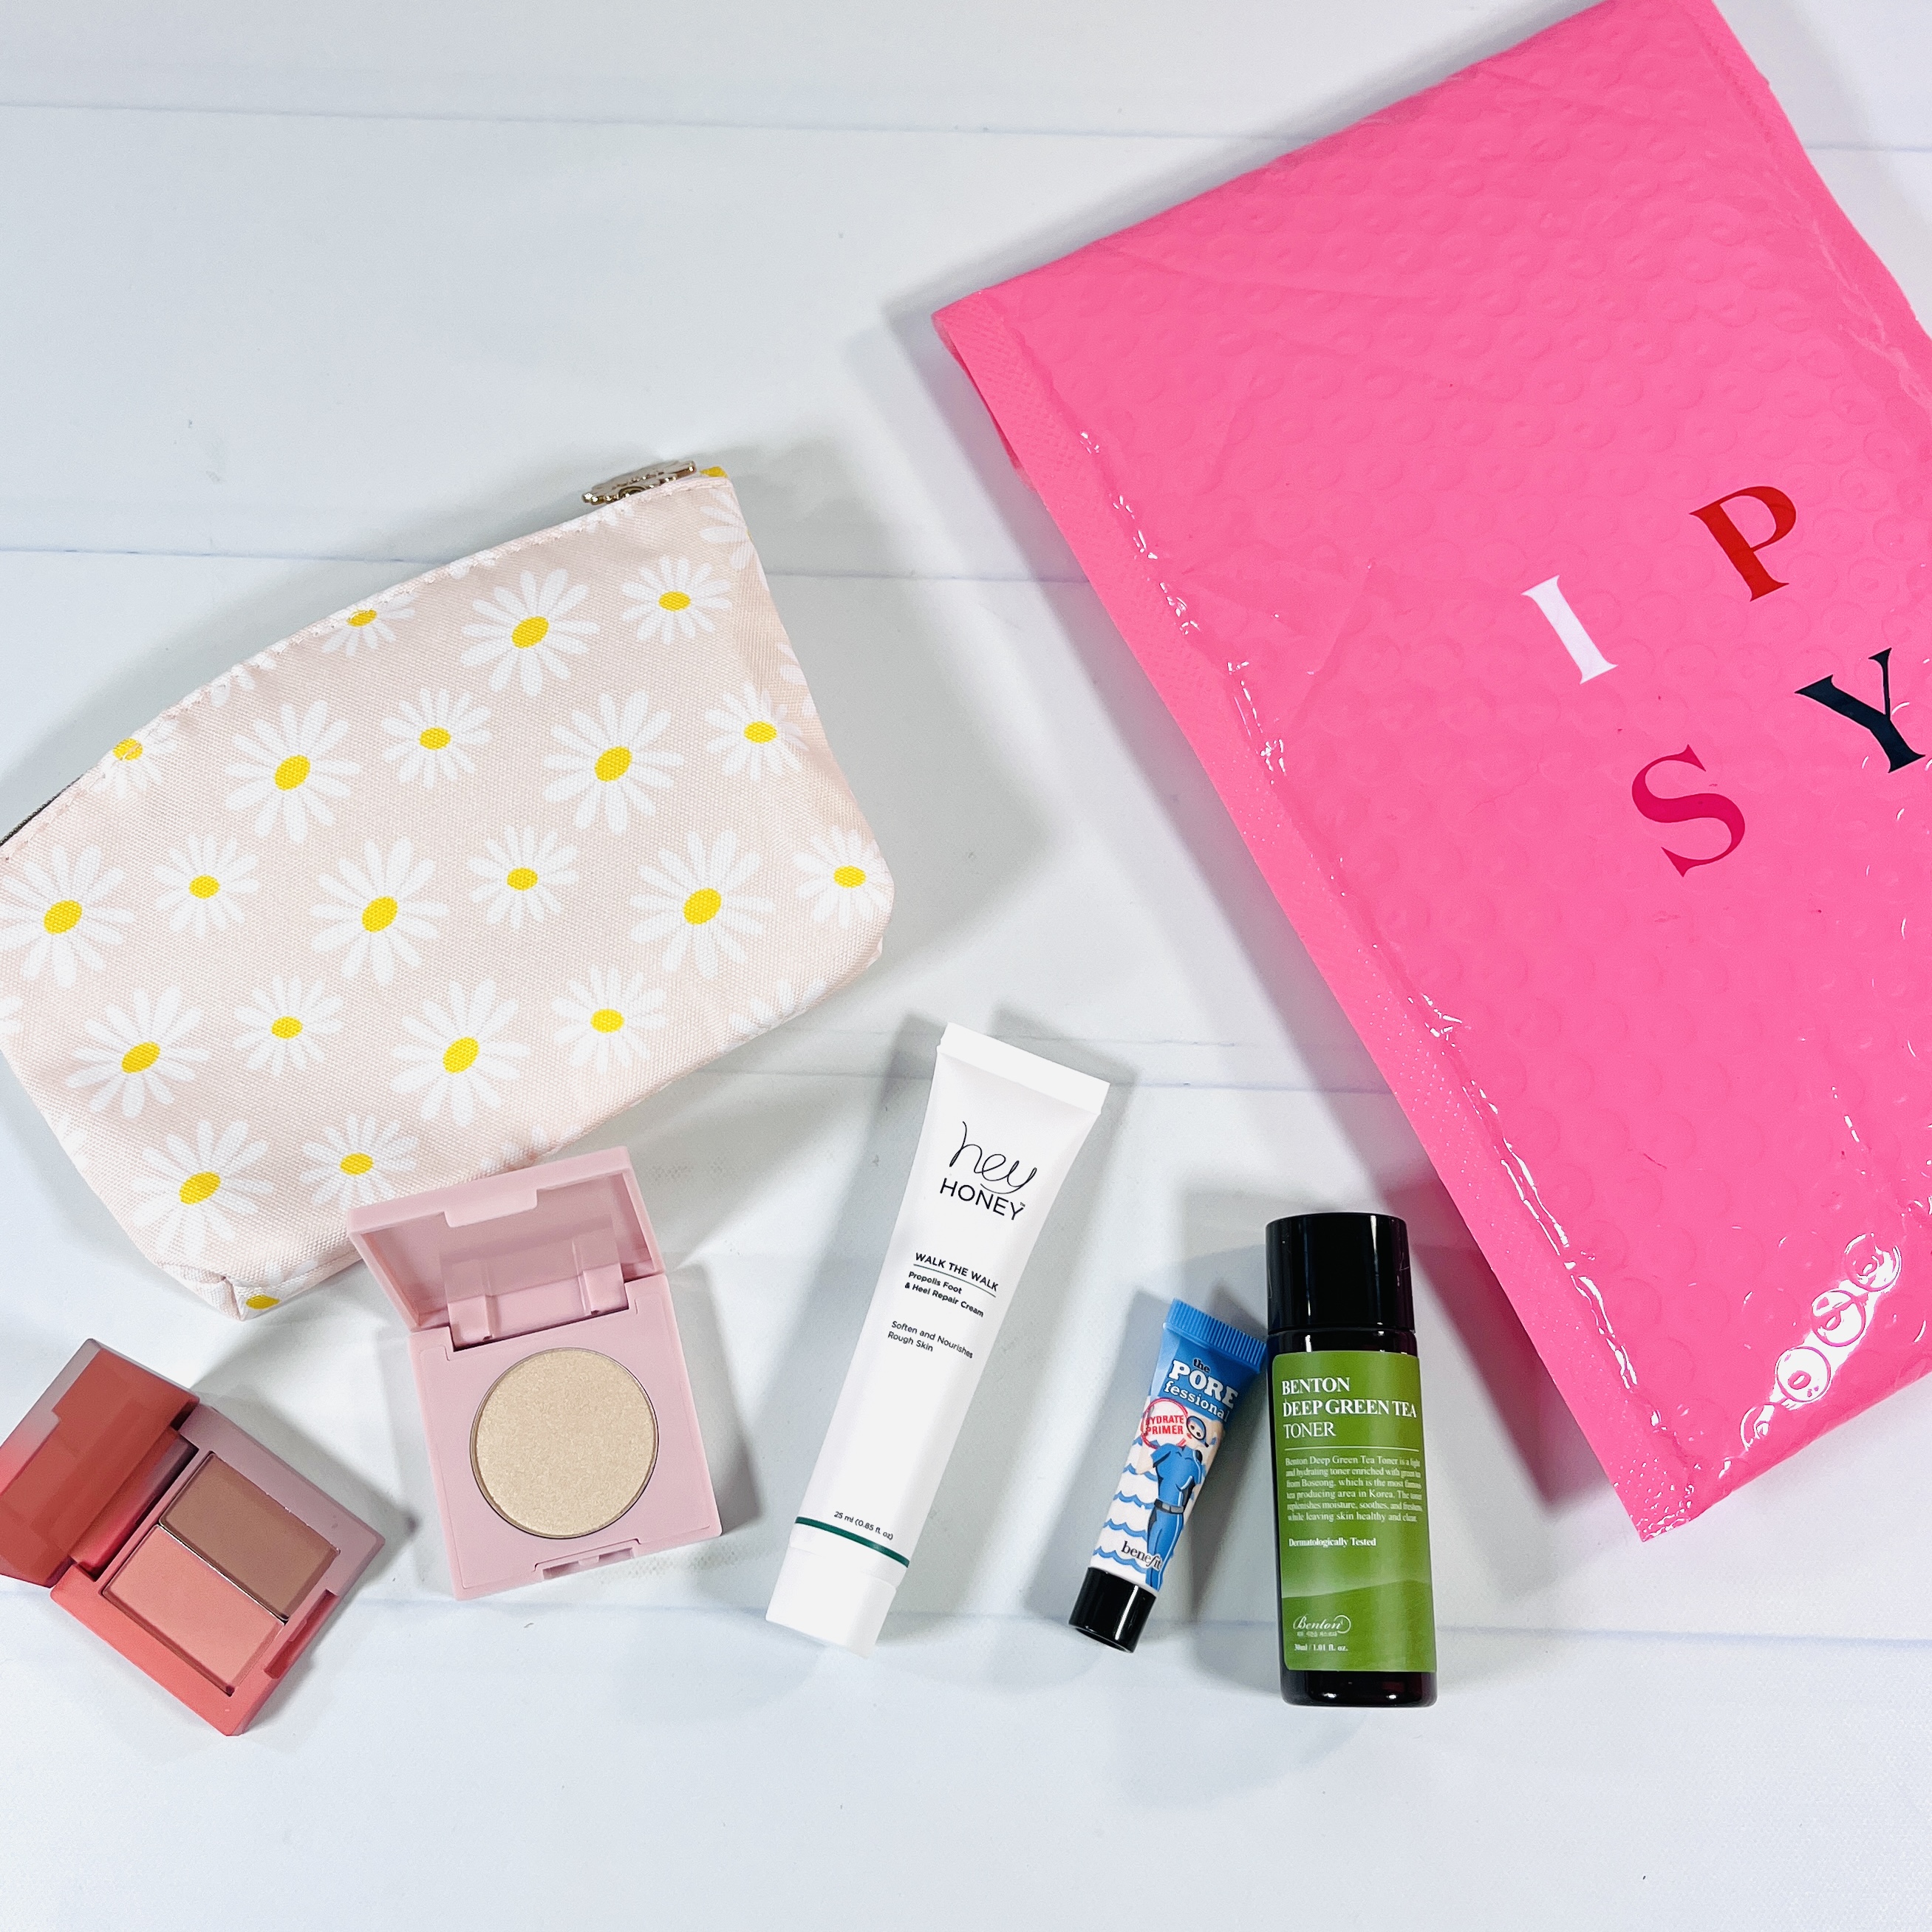 IPSY free beauty gift giveaway: Subscription service celebrates 100th glam  bag